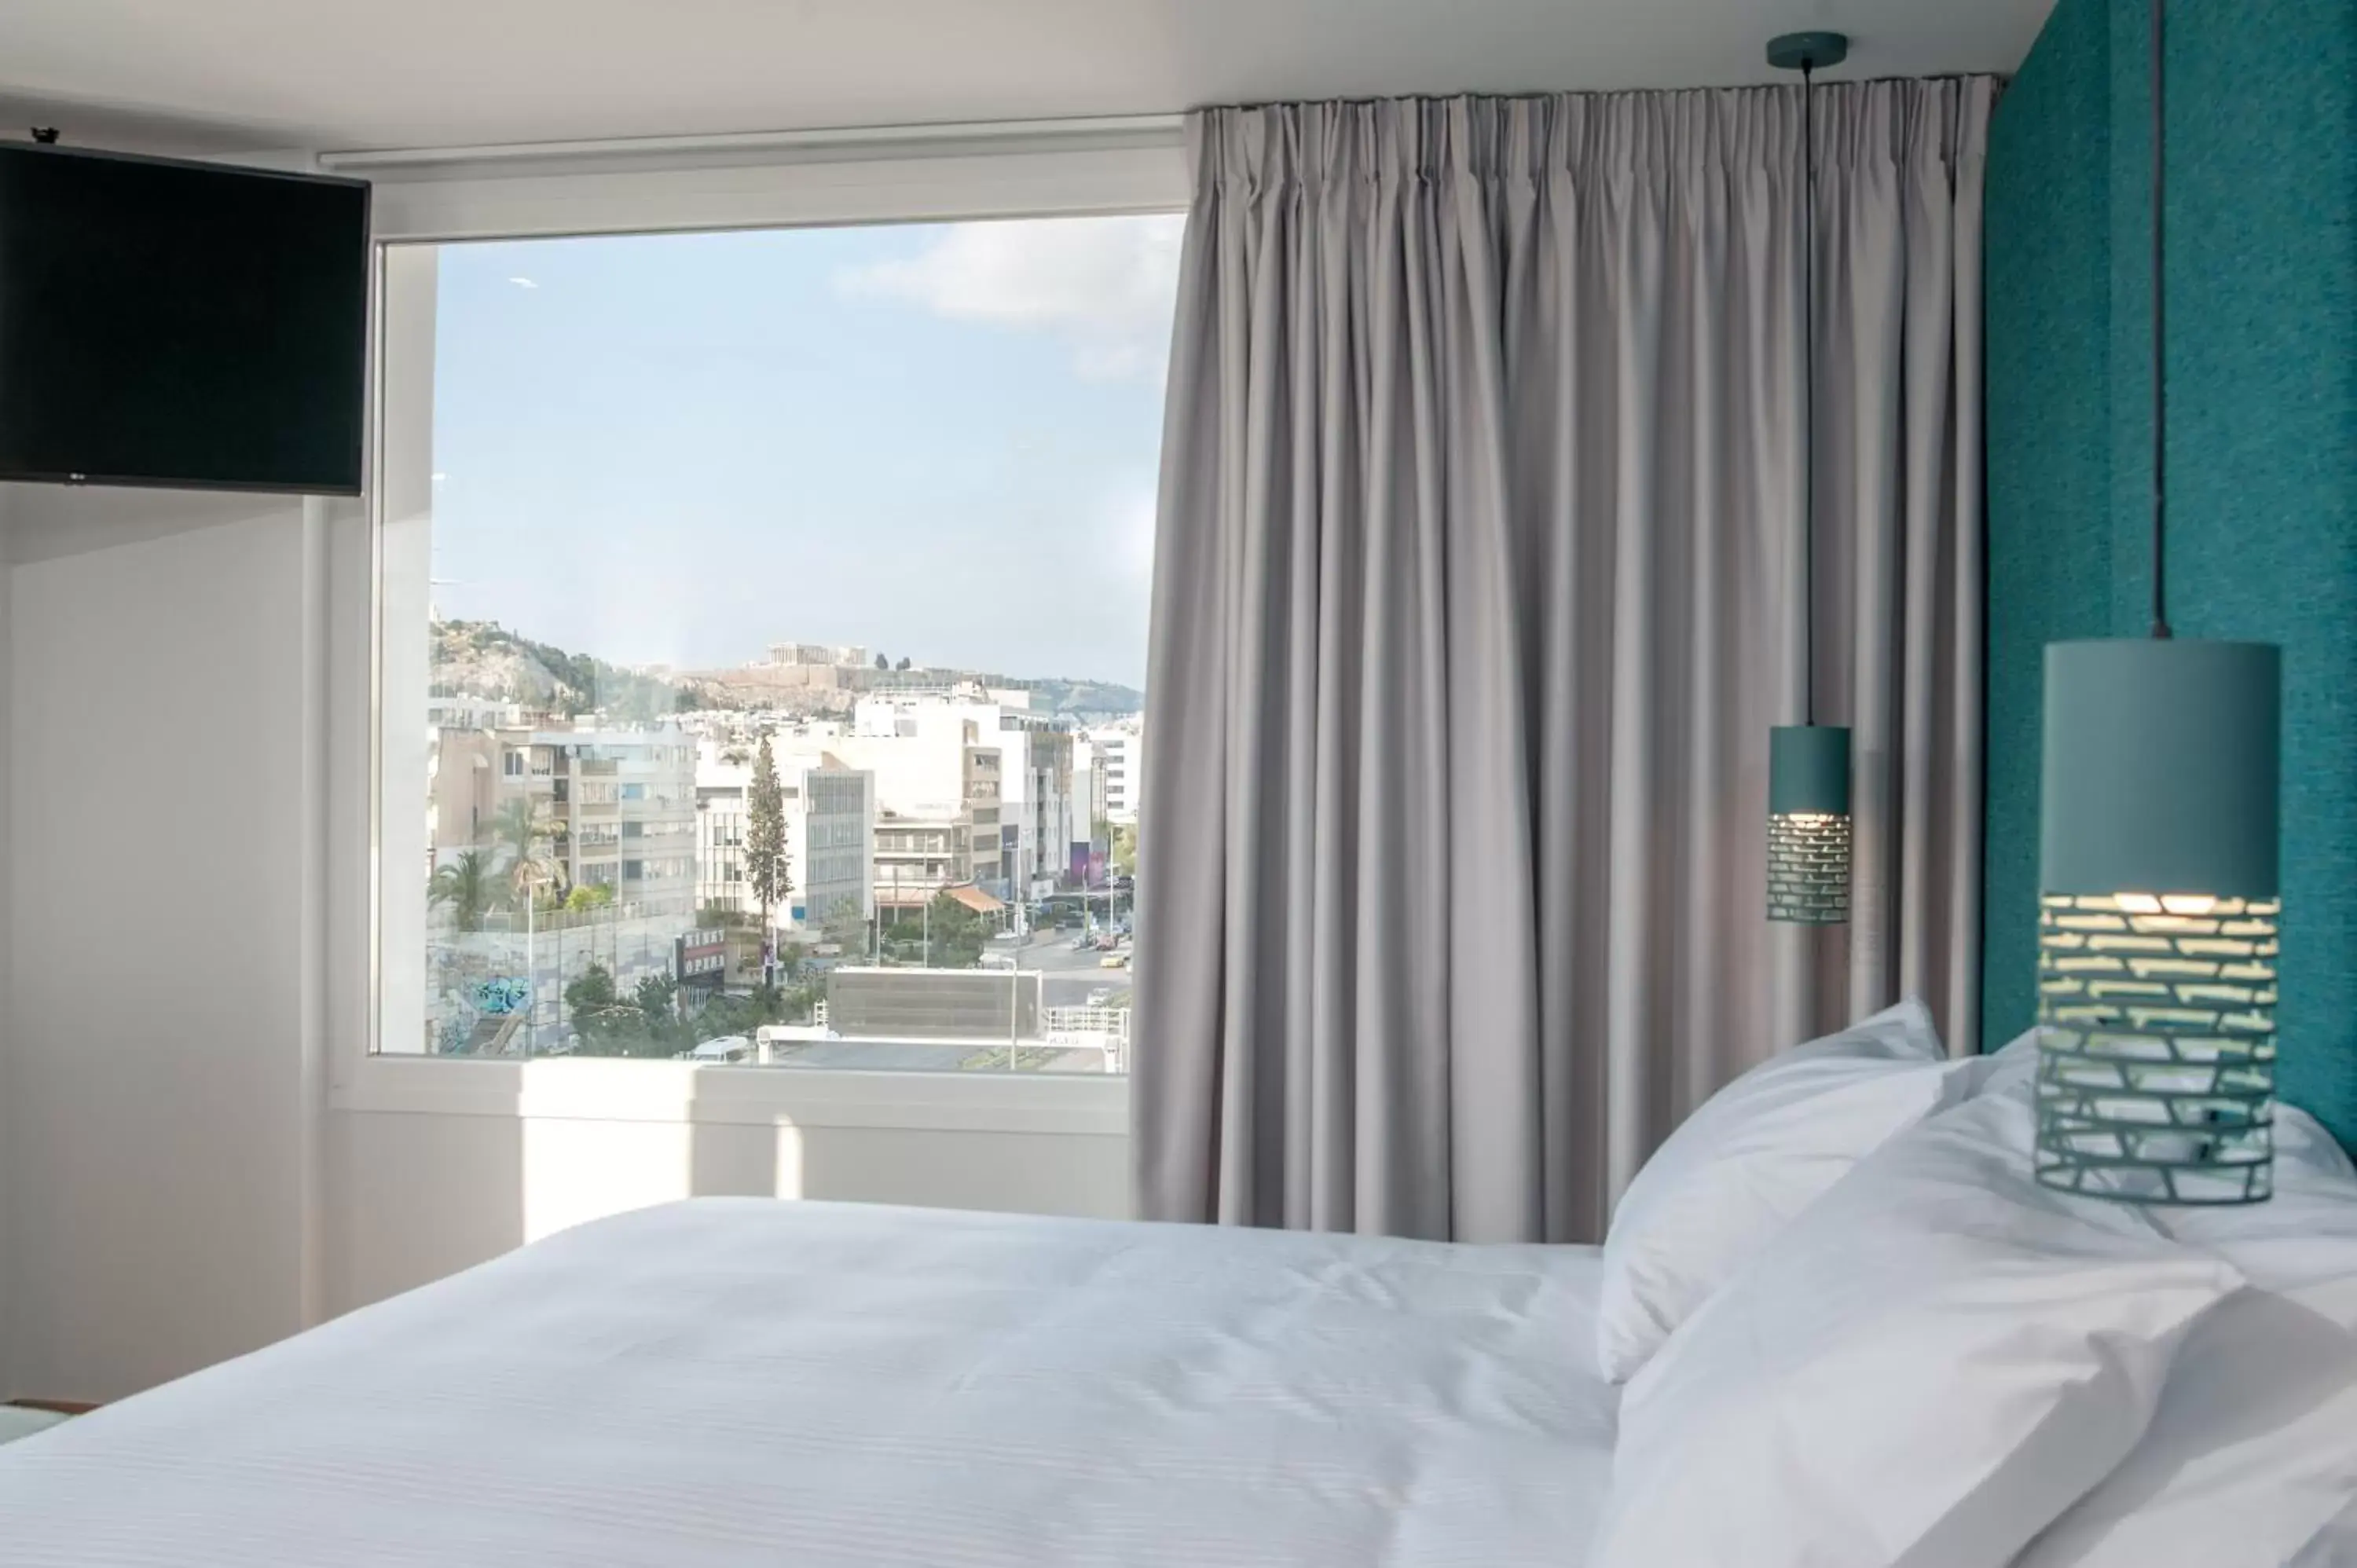 Bed in Athenaeum Smart Hotel